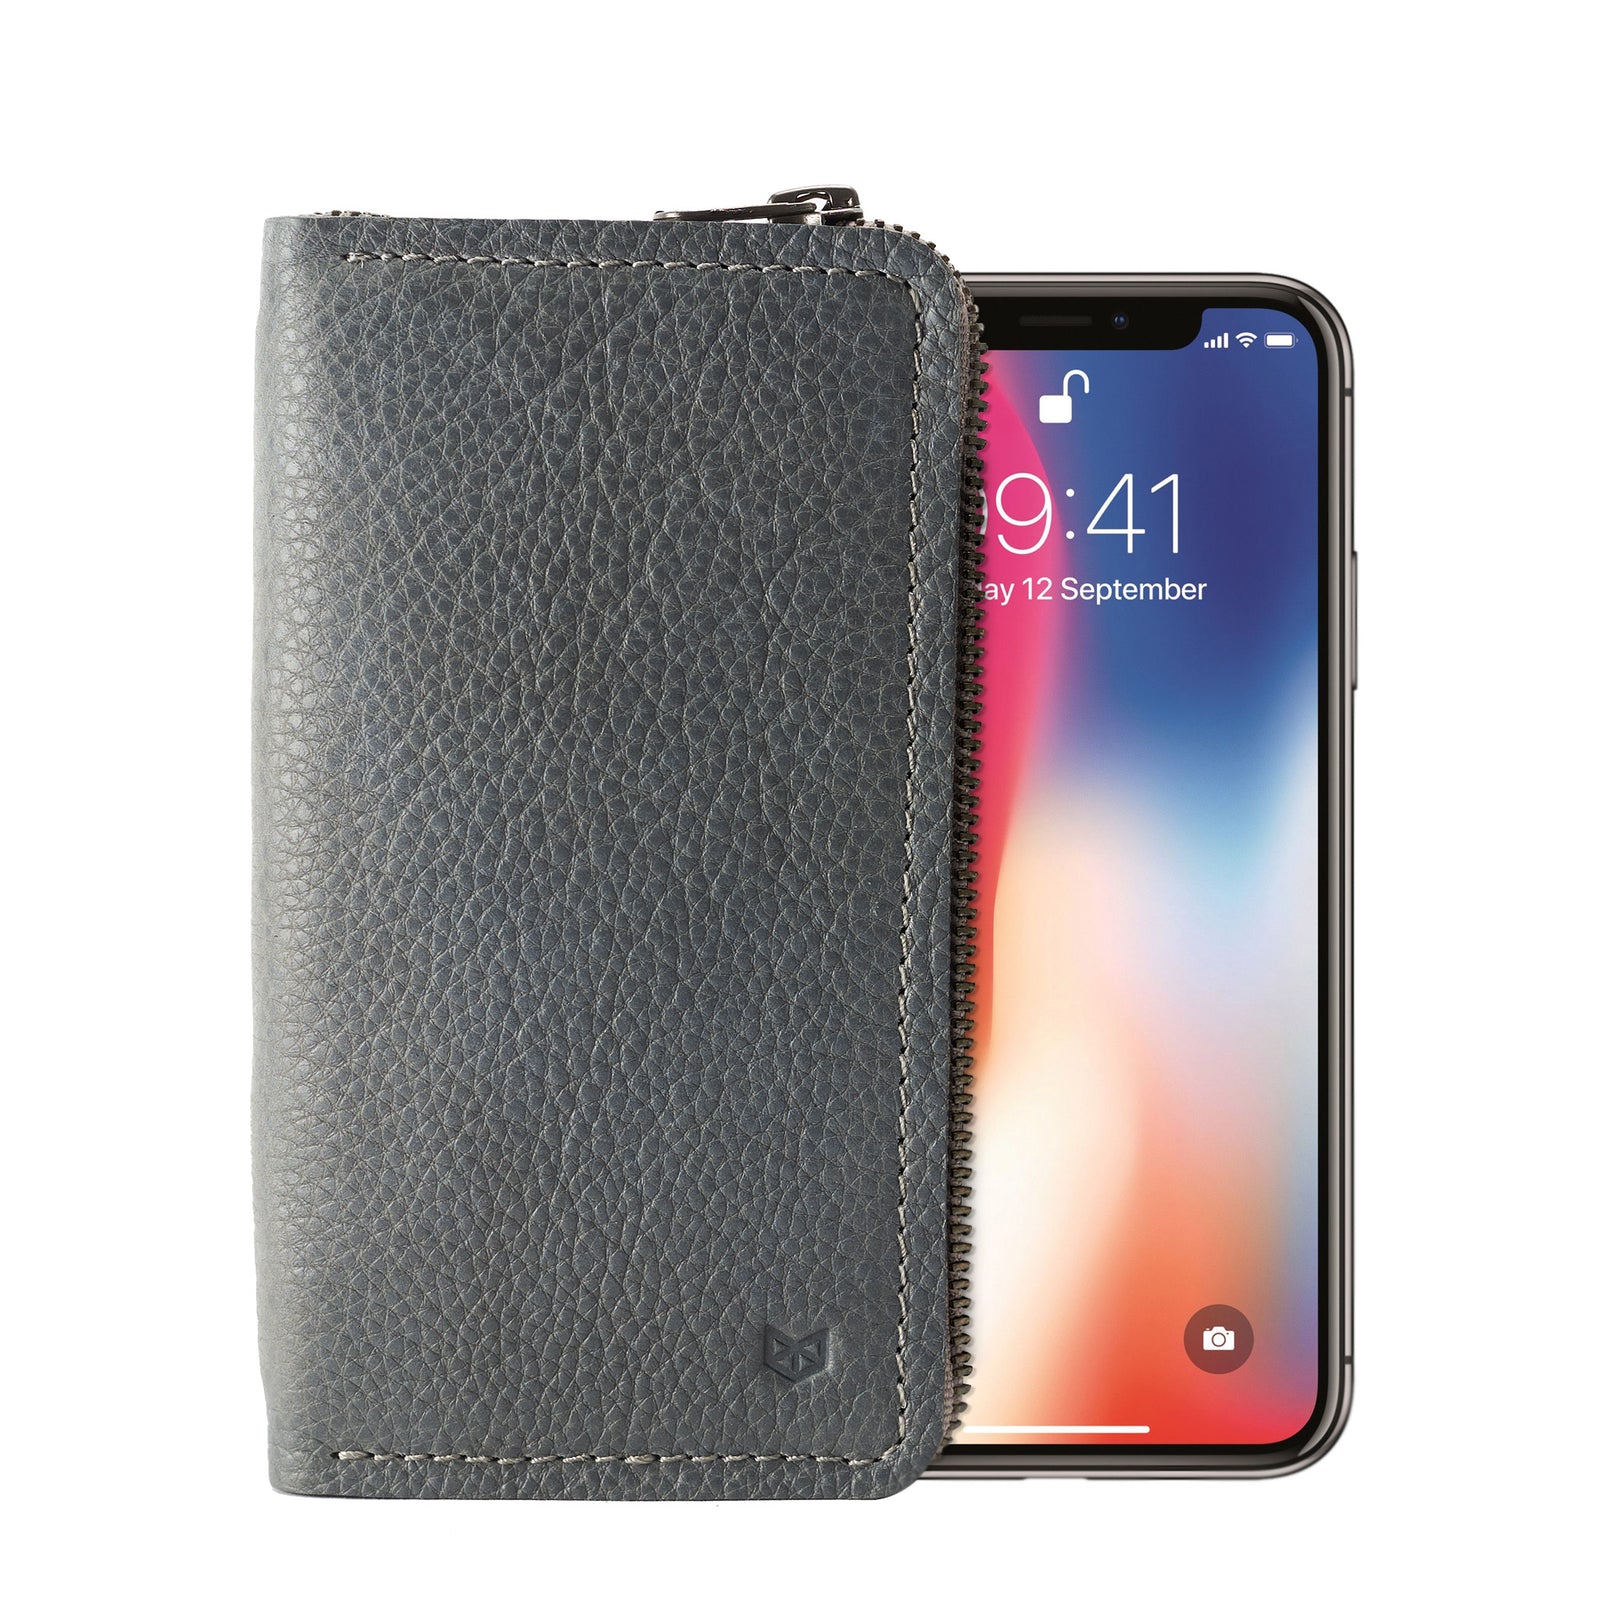 Grey iPhone leather wallet stand case for mens gifts. iPhone x, iPhone 10, iPhone 8 plus leather stand sleeve